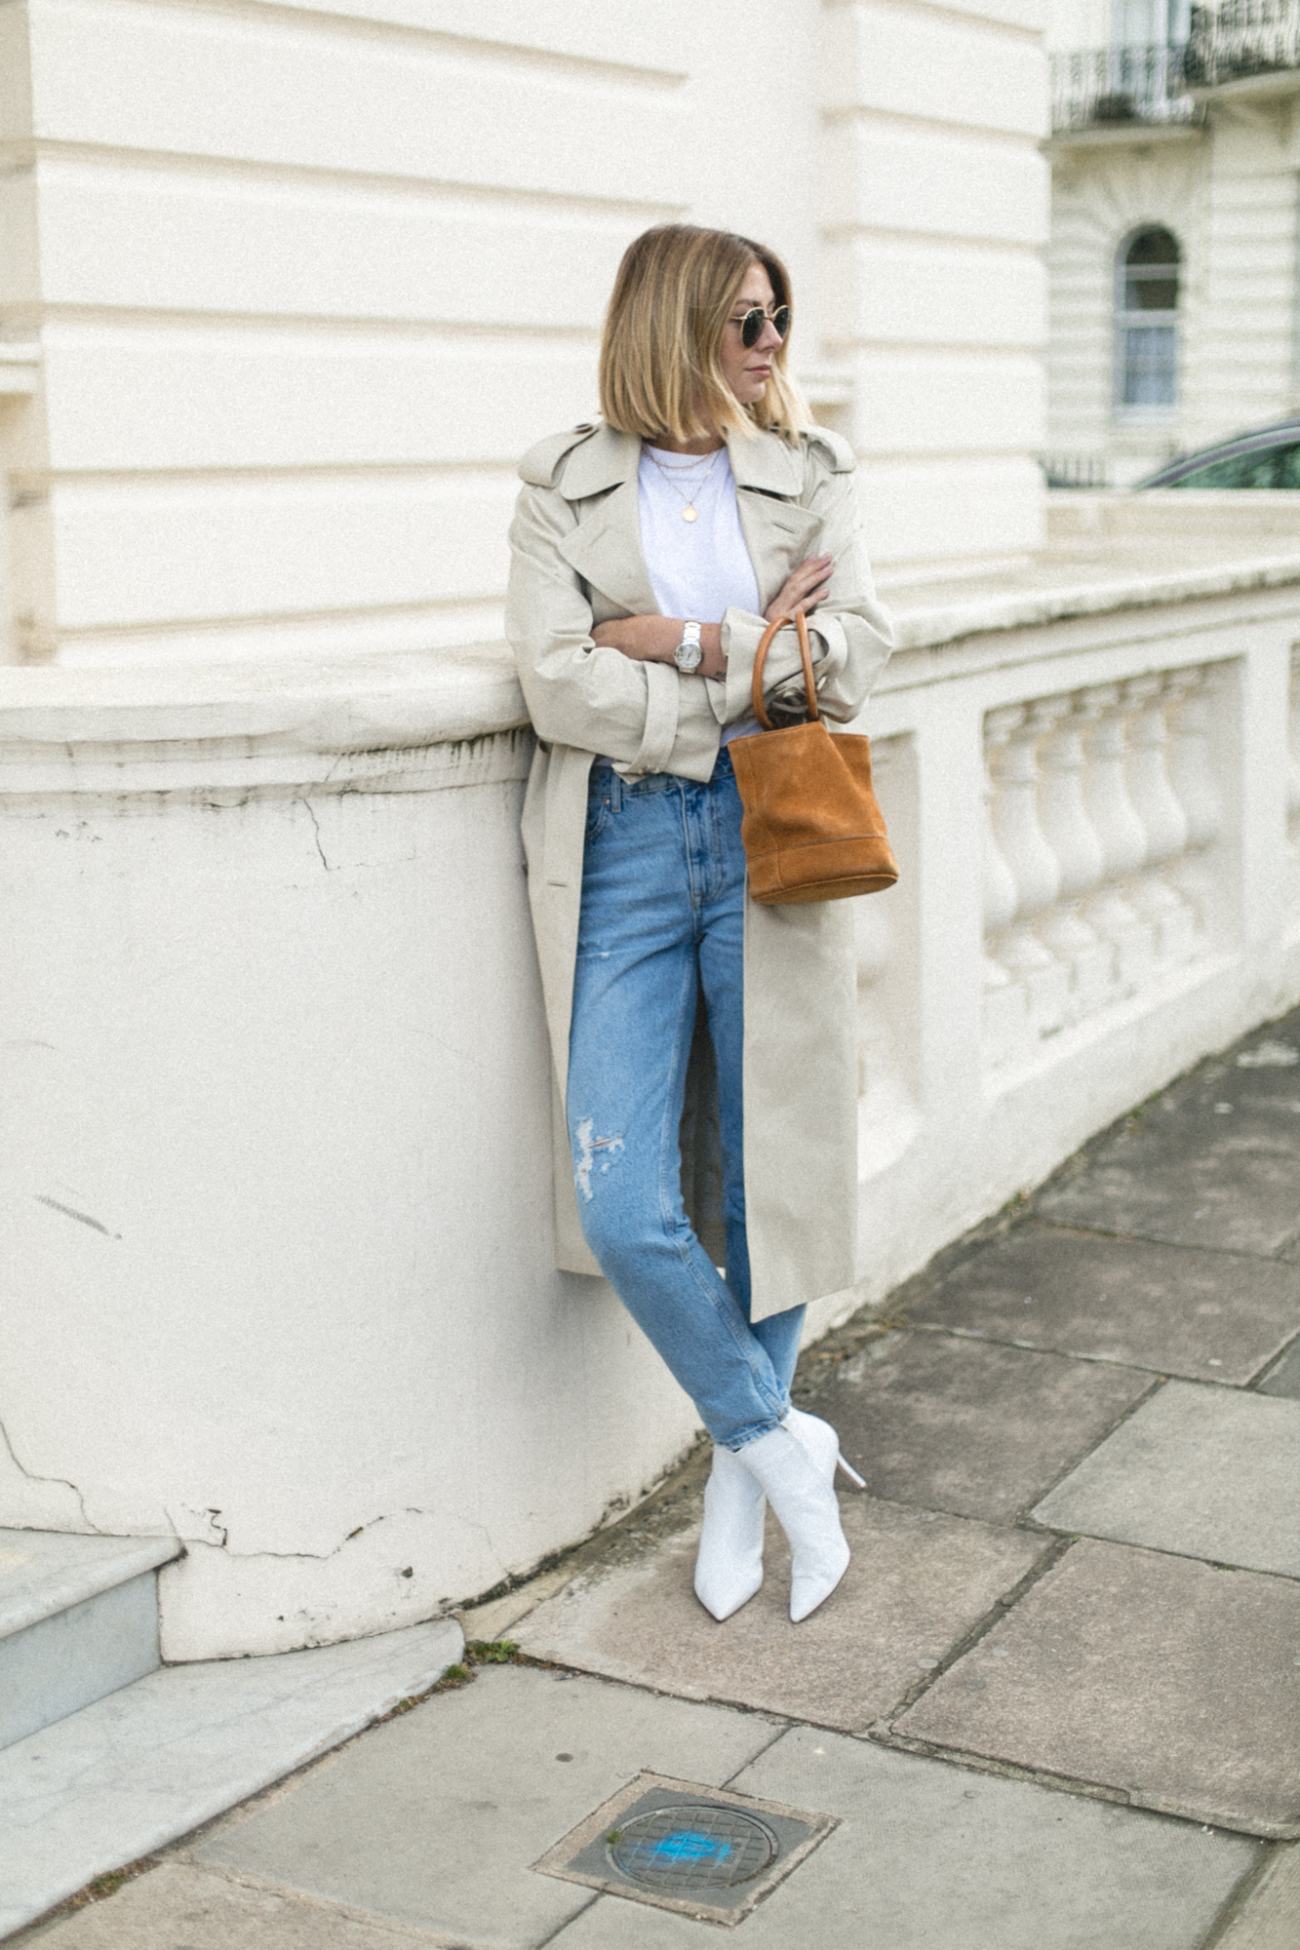 Emma Hill wearing Trench coat, light wash jeans, white ankle boots, Simon Miller tan nubuck Bonsai bucket bag, chic Spring outfit